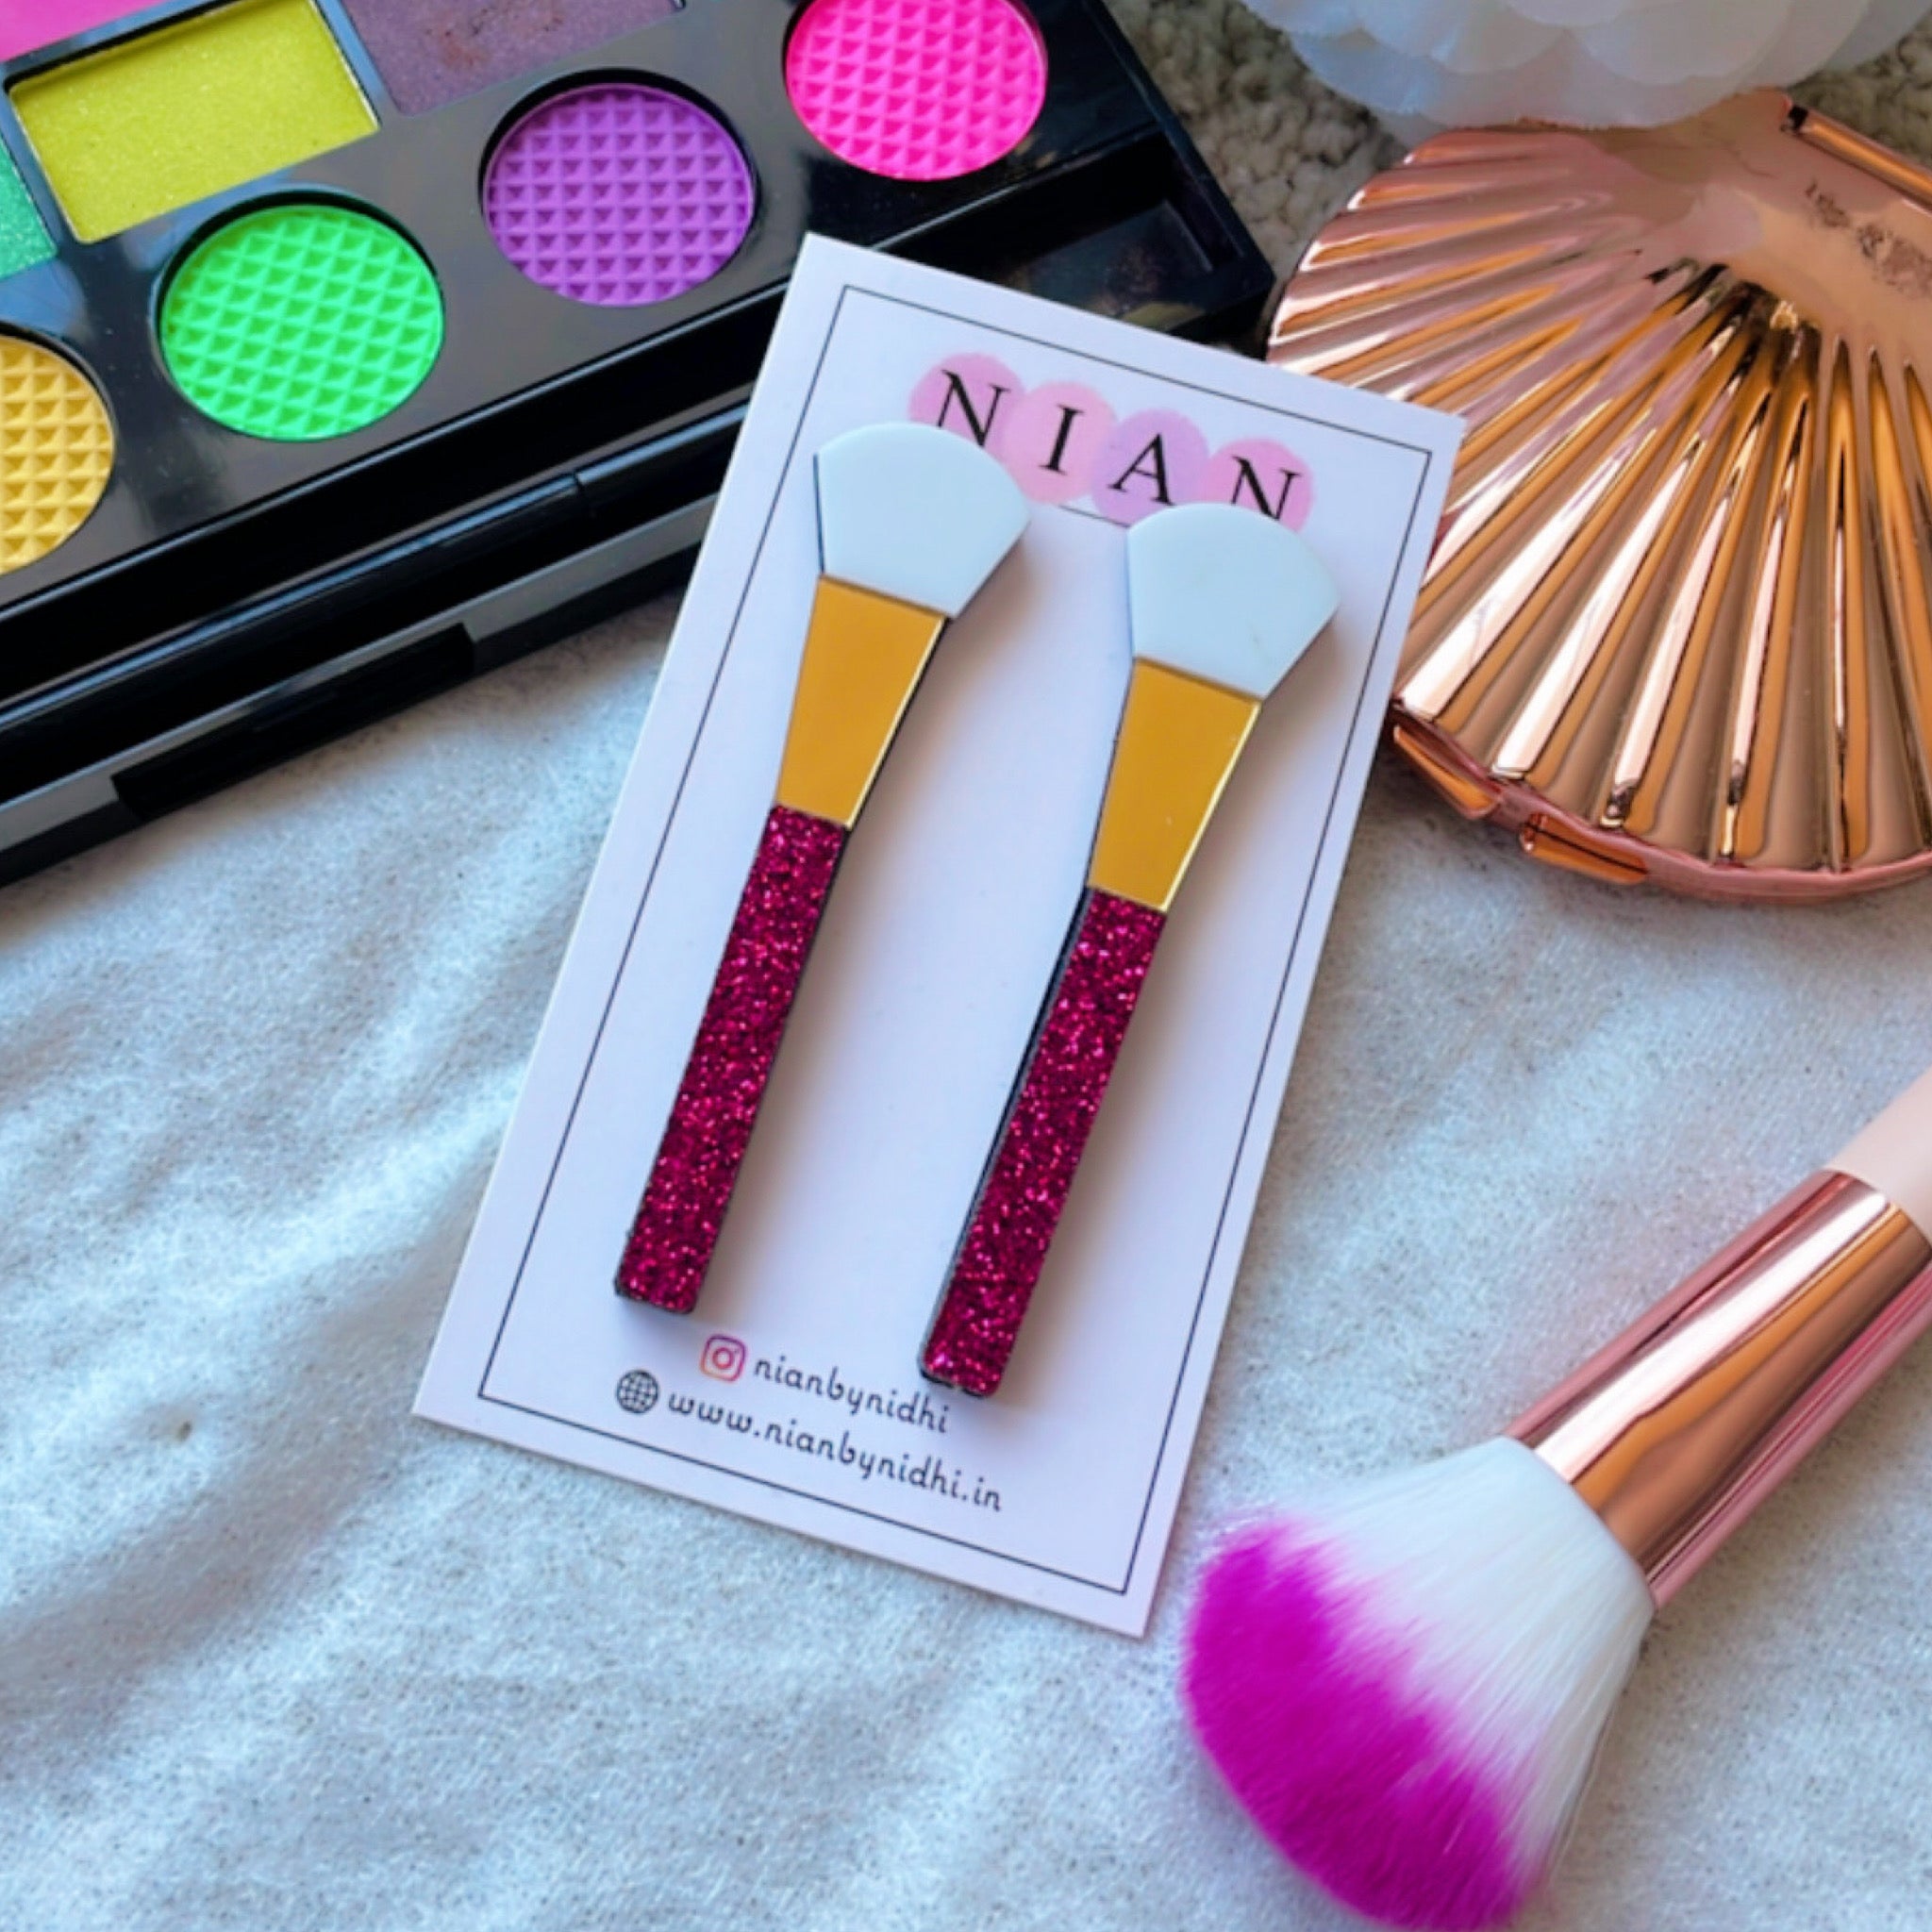 Makeup Brush Earrings - white, golden and glitter pink - Nian by Nidhi - placed in a white background with actual makeup things